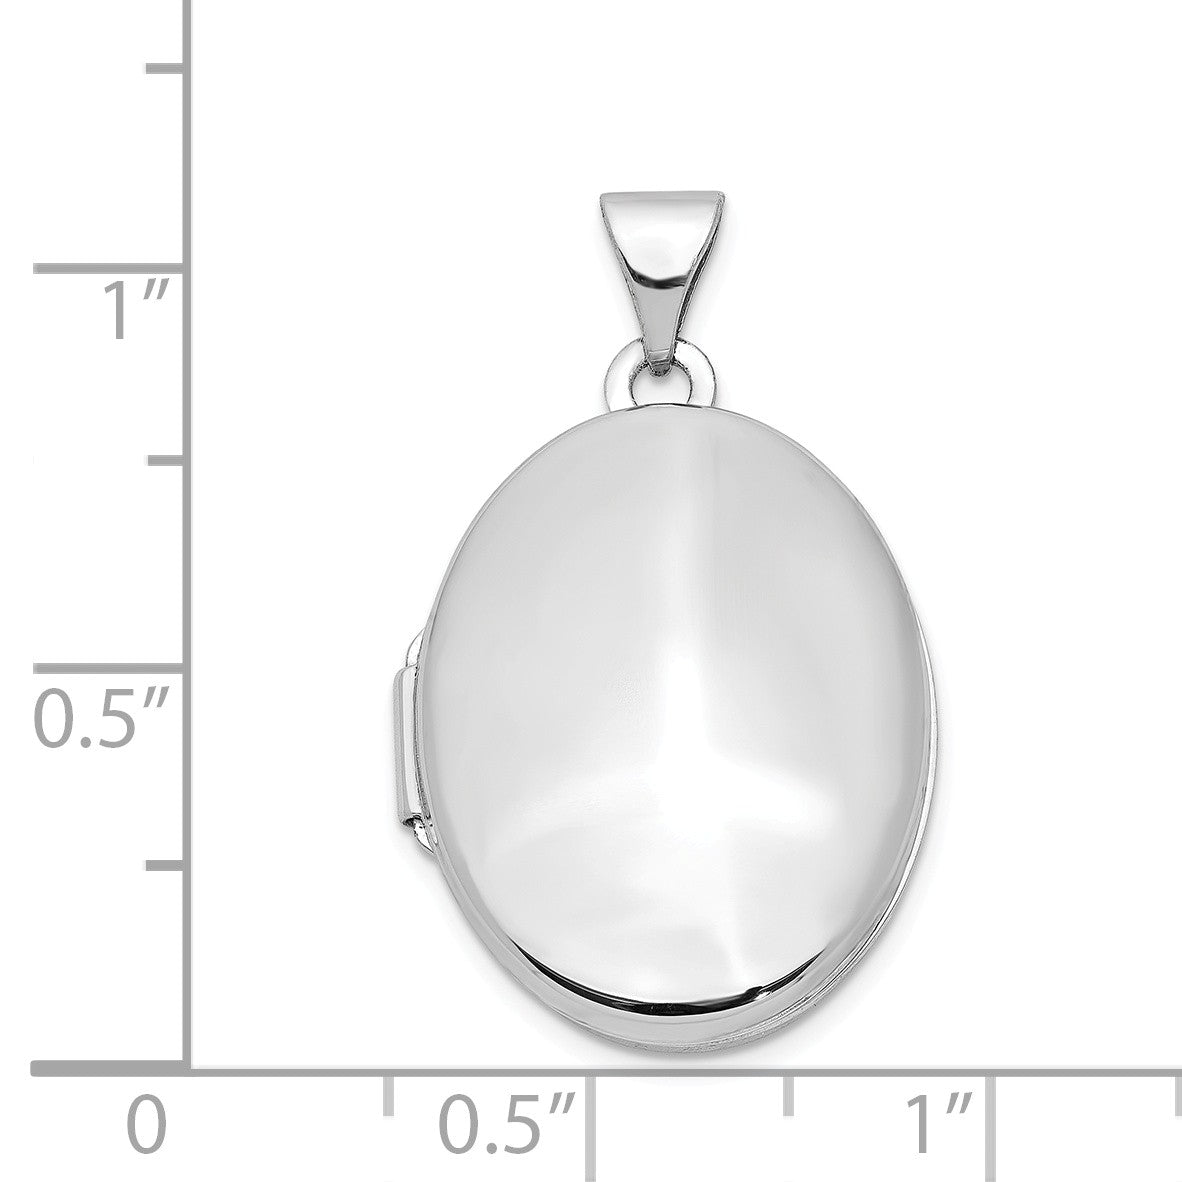 Alternate view of the 14k White Gold 21mm Polished Oval Locket by The Black Bow Jewelry Co.